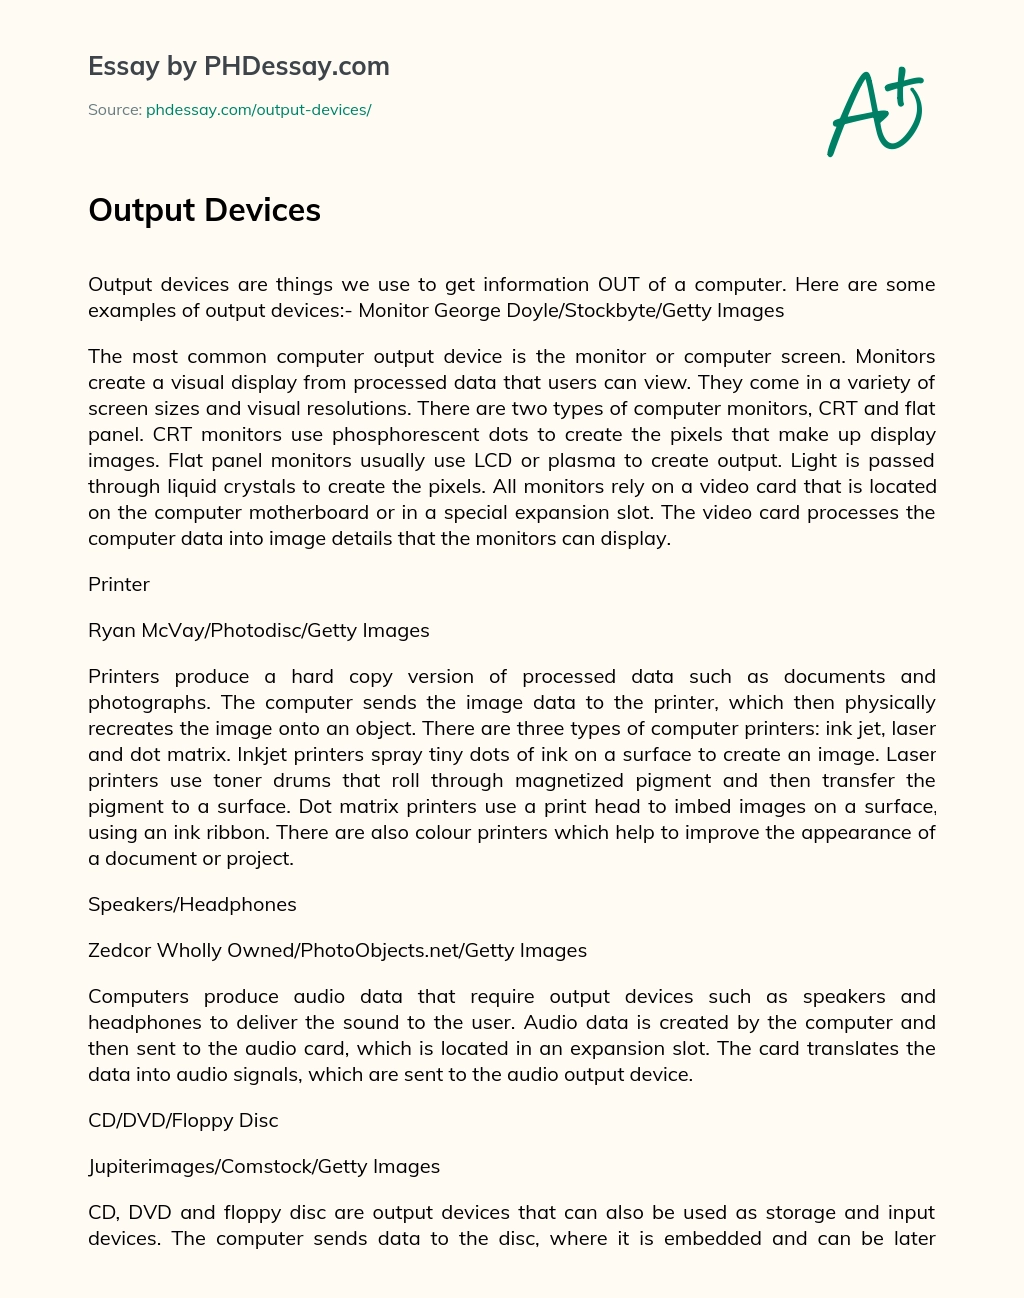 Output Devices essay